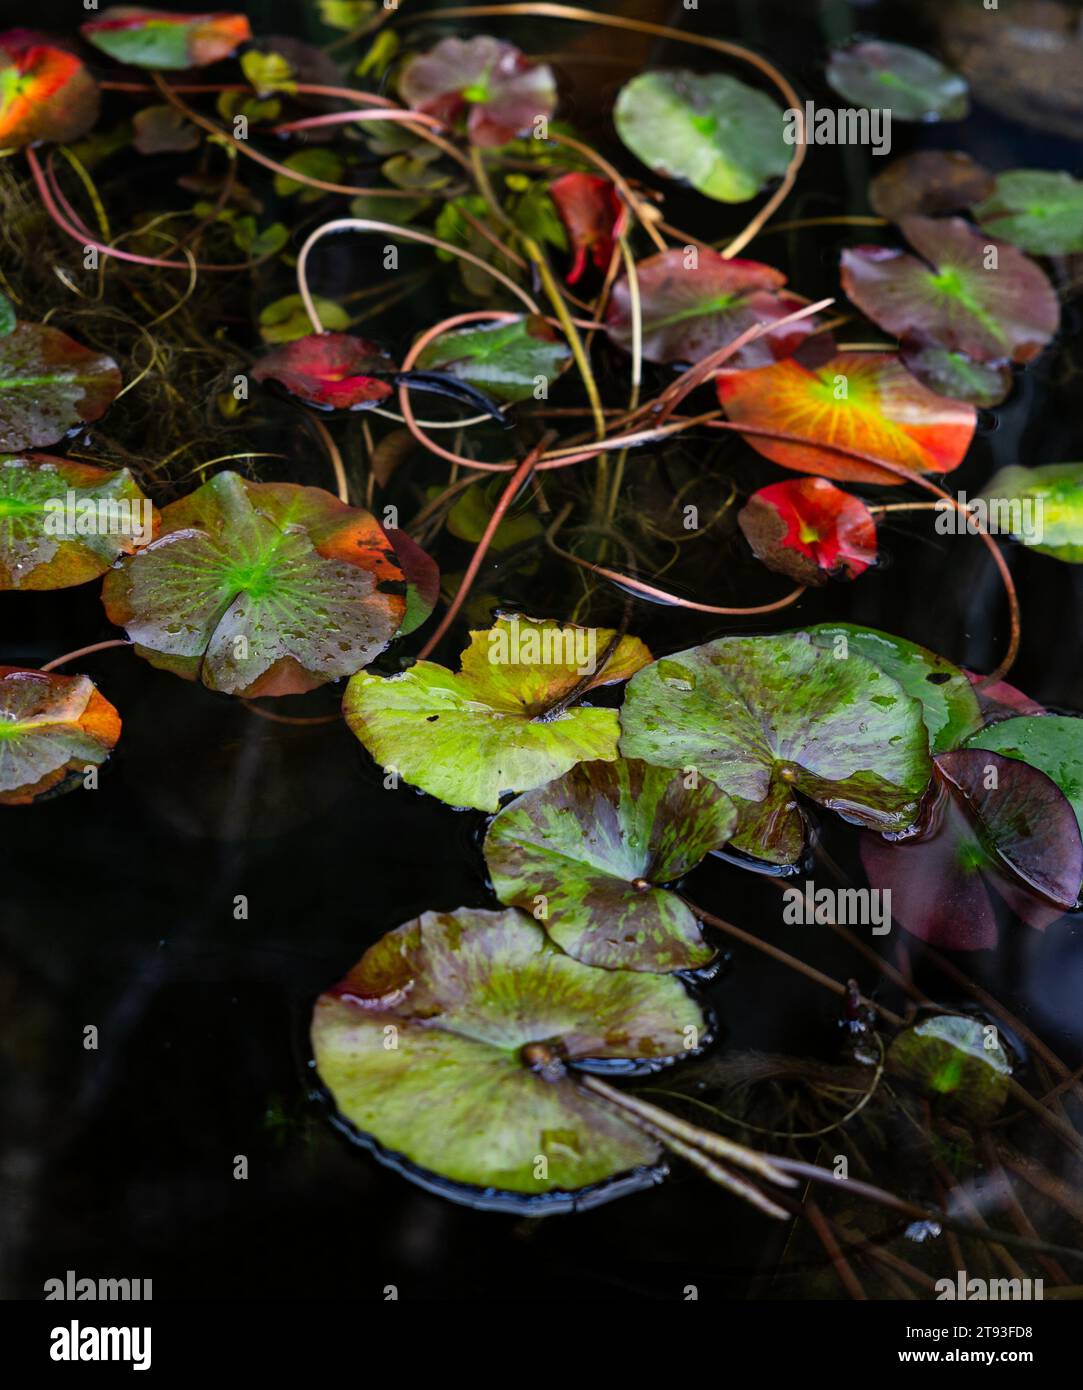 Detail of the pond vegetation with brightly colored leaves of the plant, vertical picture Stock Photo